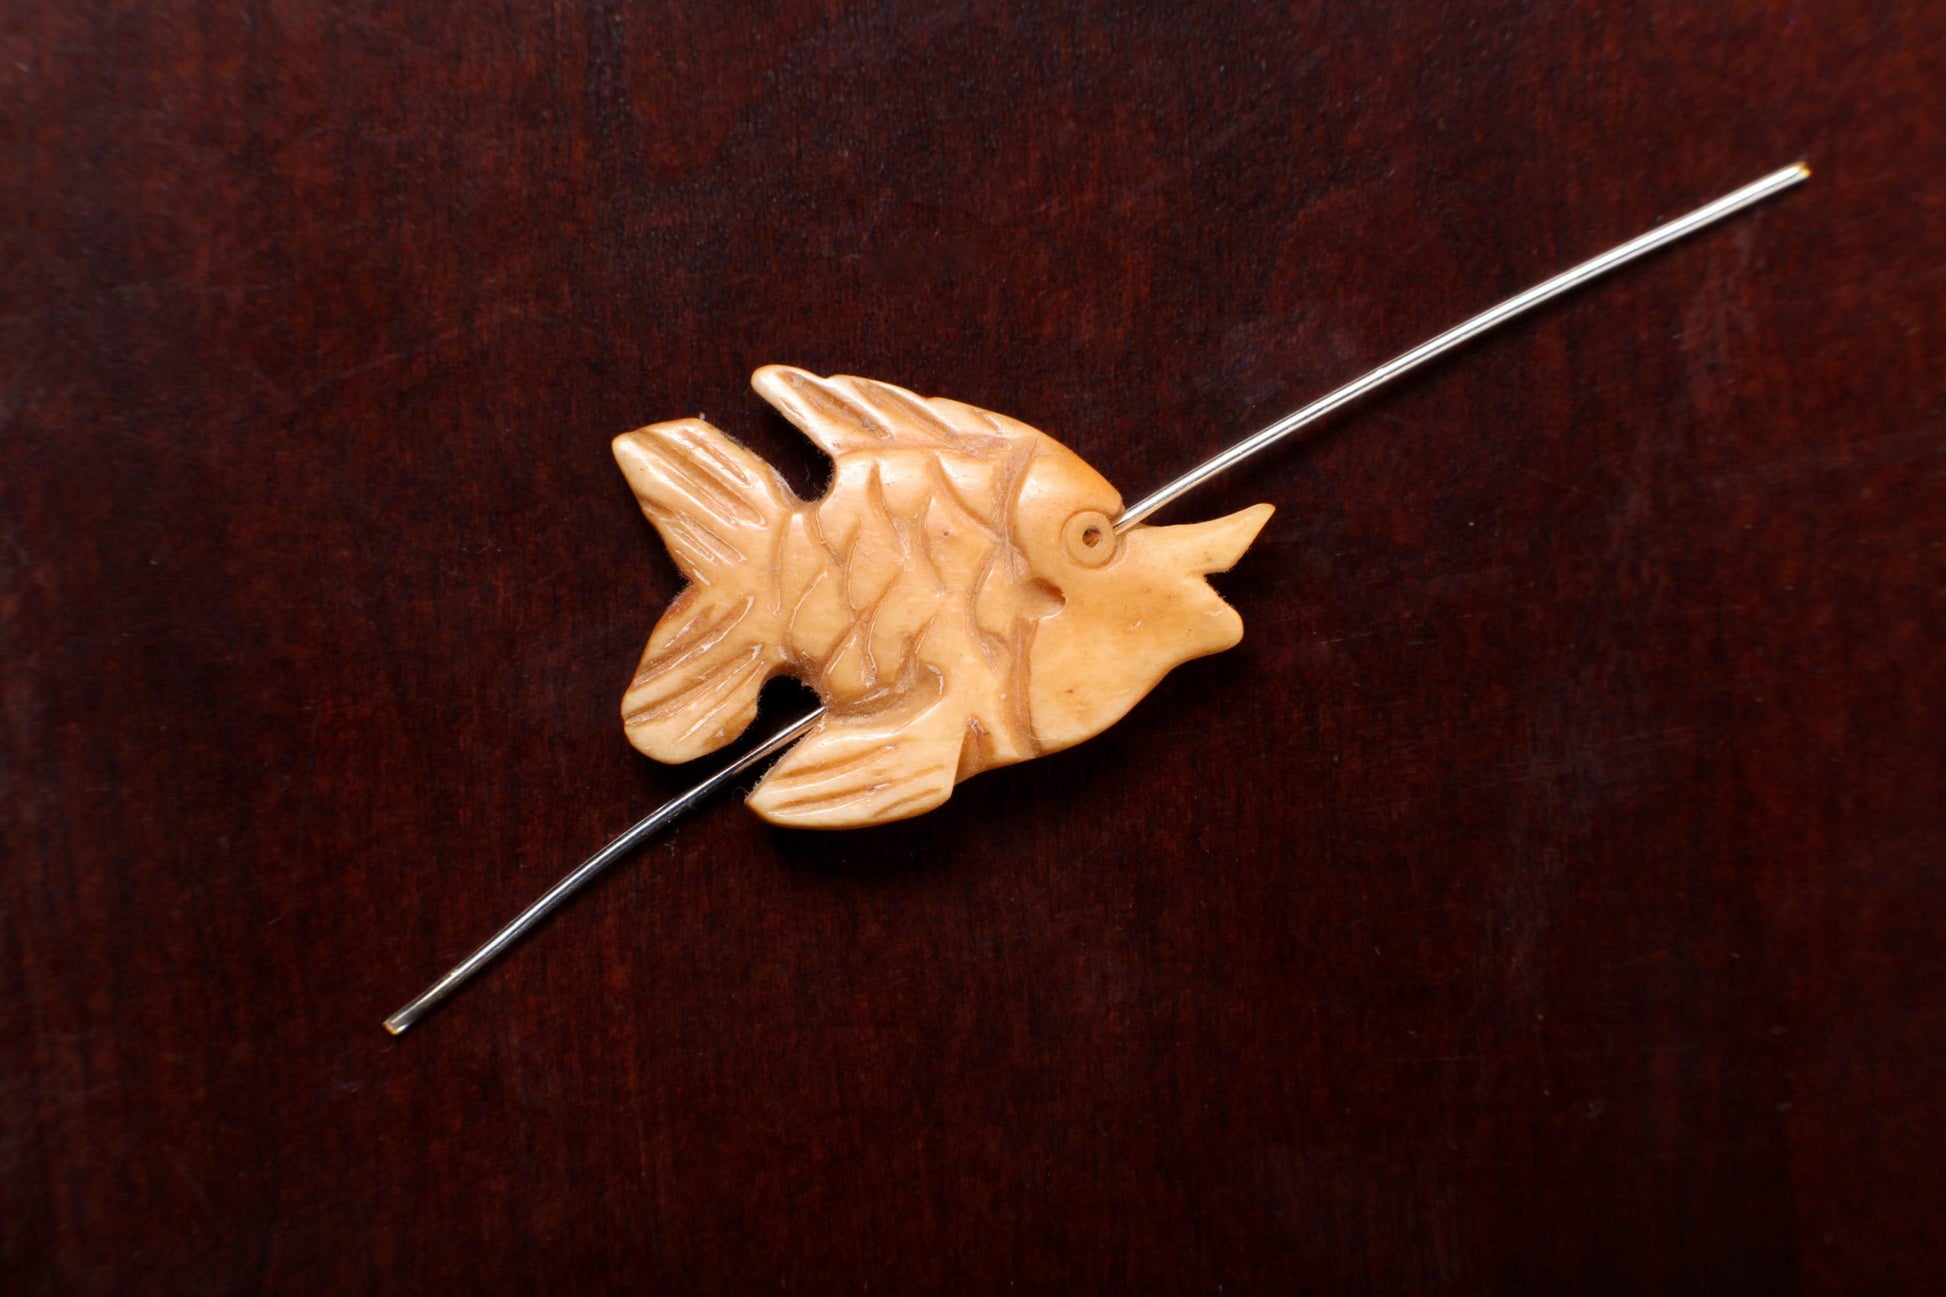 Carved Buffalo Bone Gold Fish, Tropical Fish 18x25mm, Hand Crafted Animal Figurine Drilled Bead, Art Deco